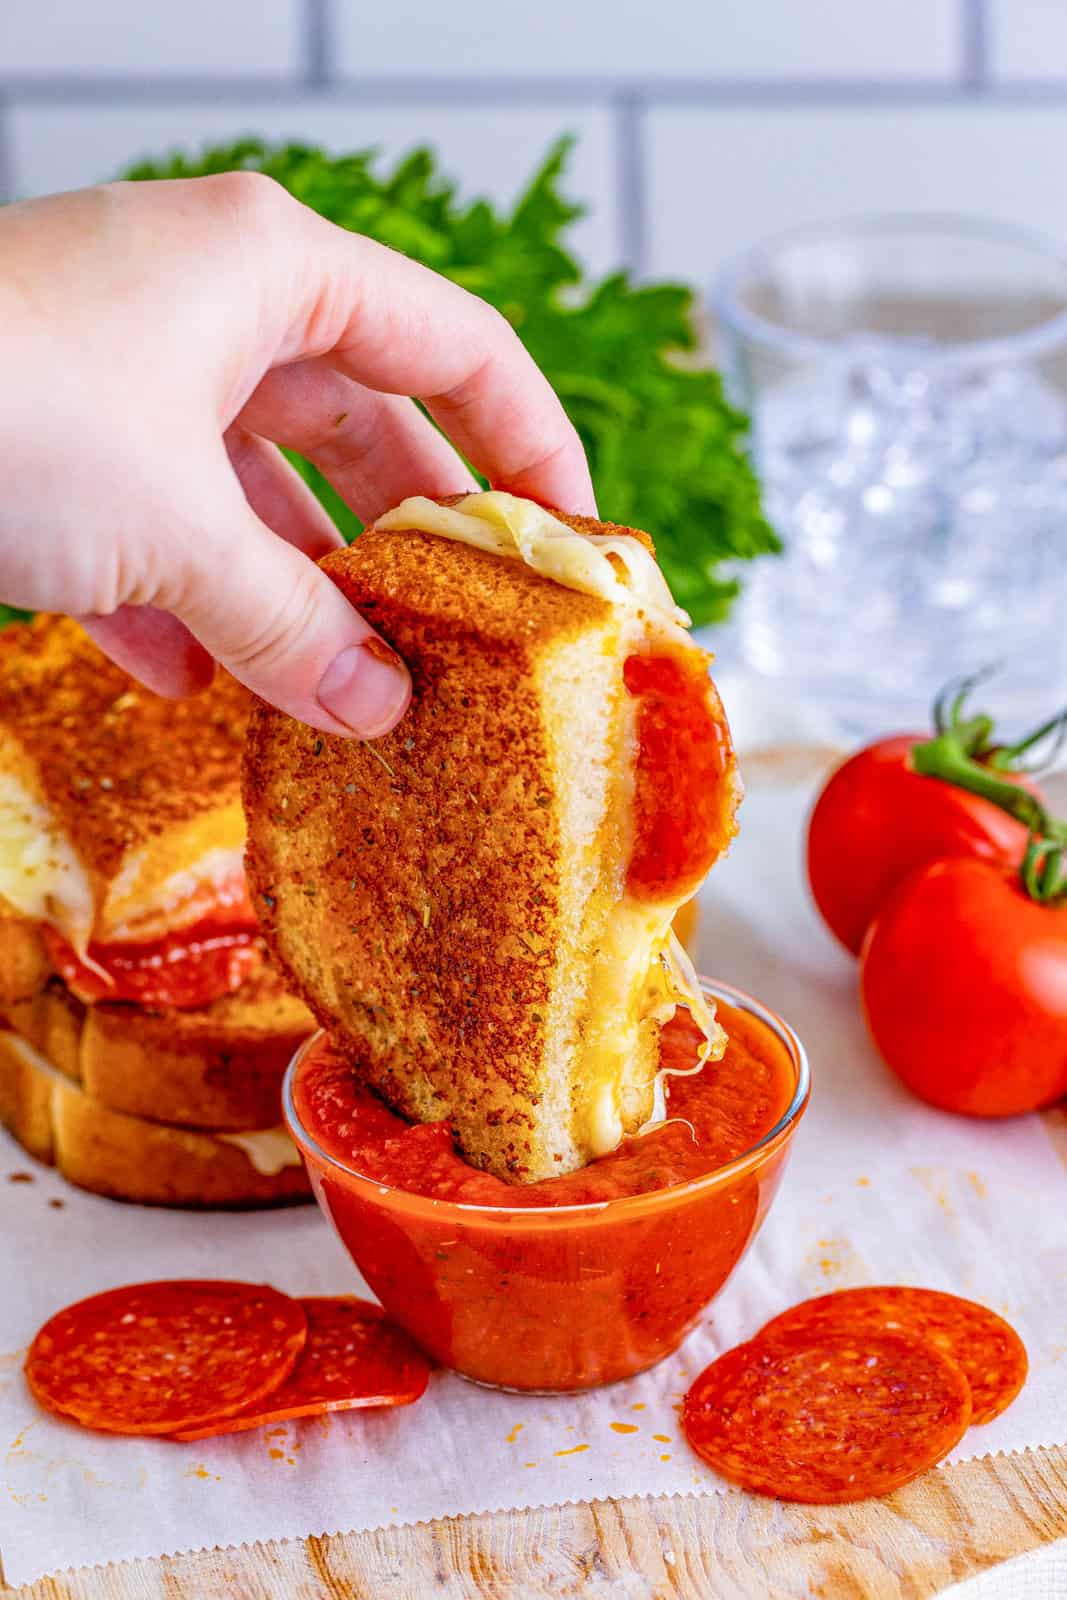 Hand dipping on half of grilled cheese into pizza sauce.